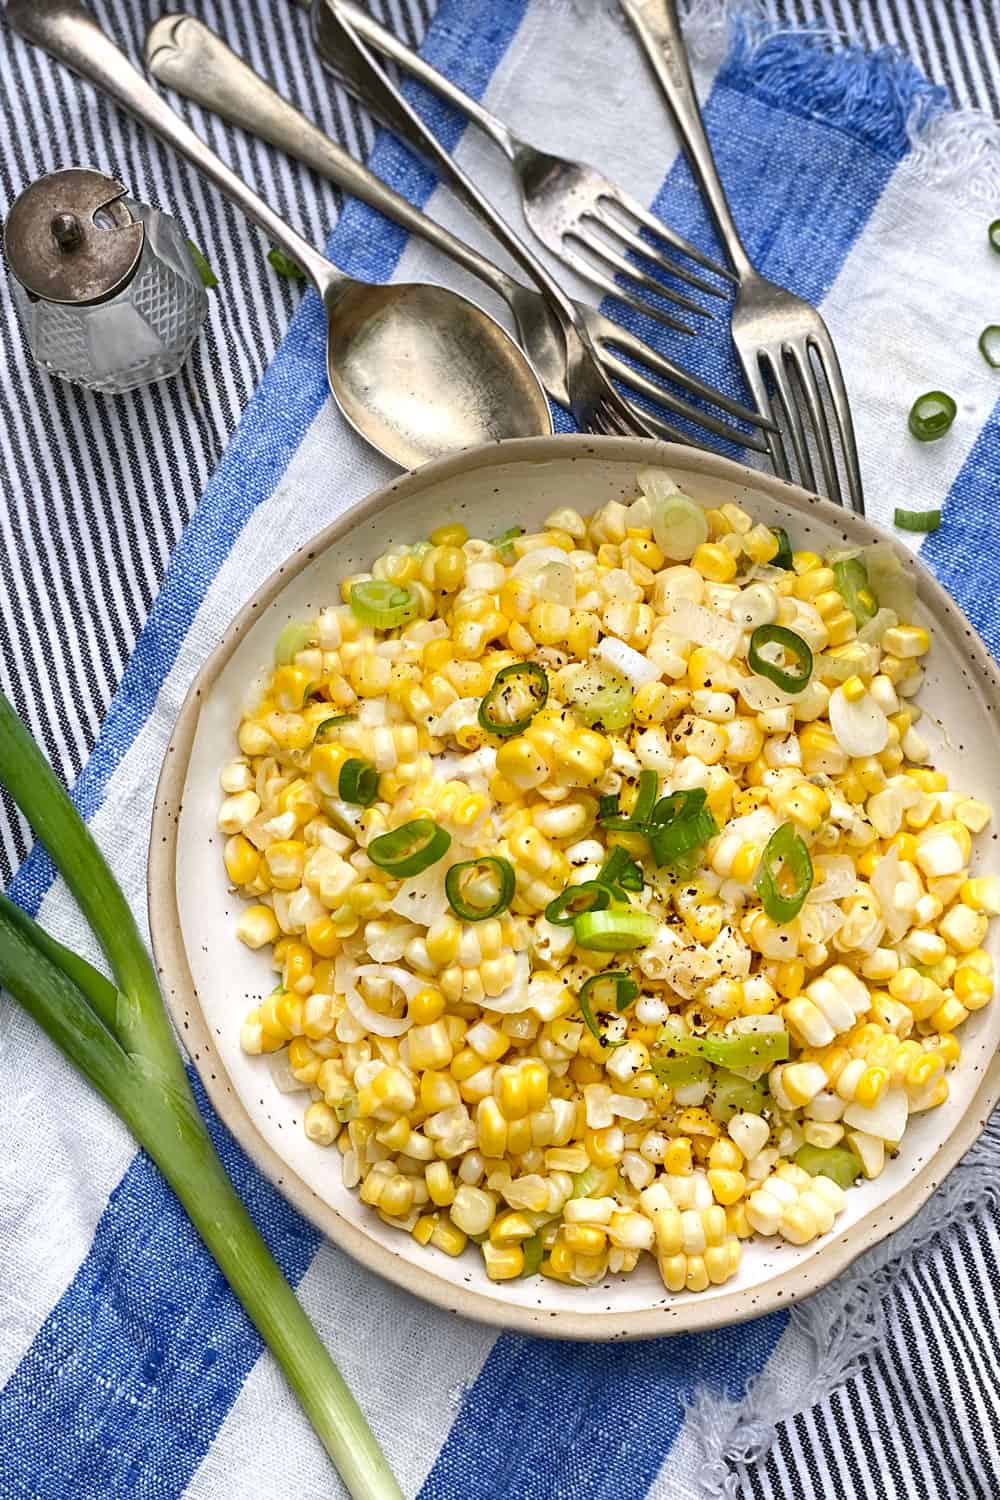 a white bowl filled with sautéed corn kernels and chopped scallions. The bowl sits on a blue and white striped cloth napkin and several pieces of flatware are in the background